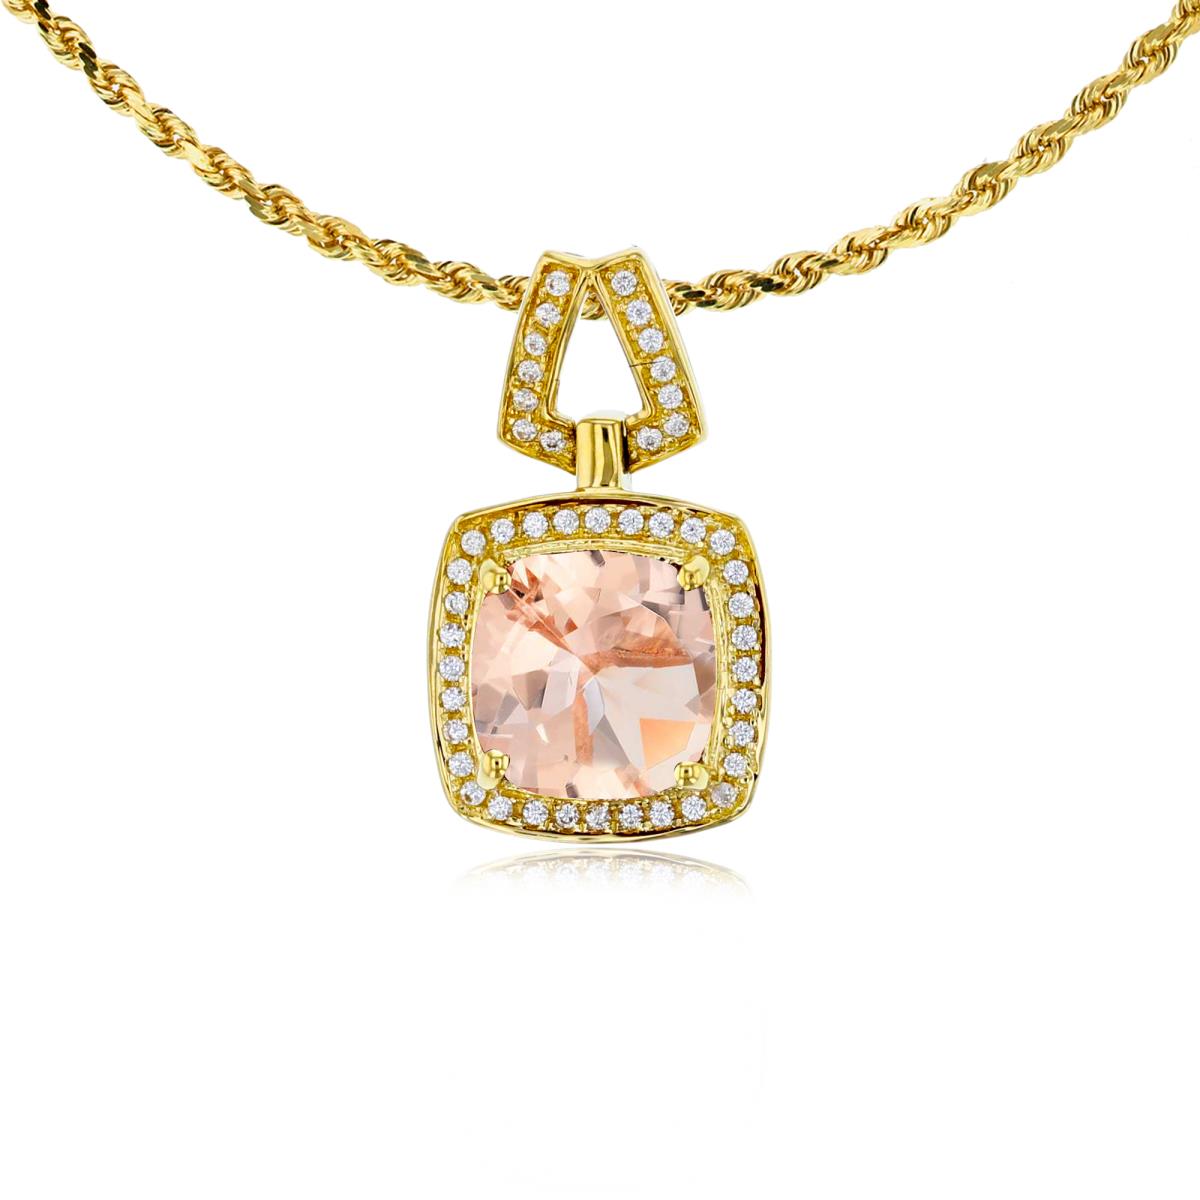 10K Yellow Gold 7mm Cushion Morganite & 0.10 CTTW Diamond Halo 18" Rope Chain Necklace